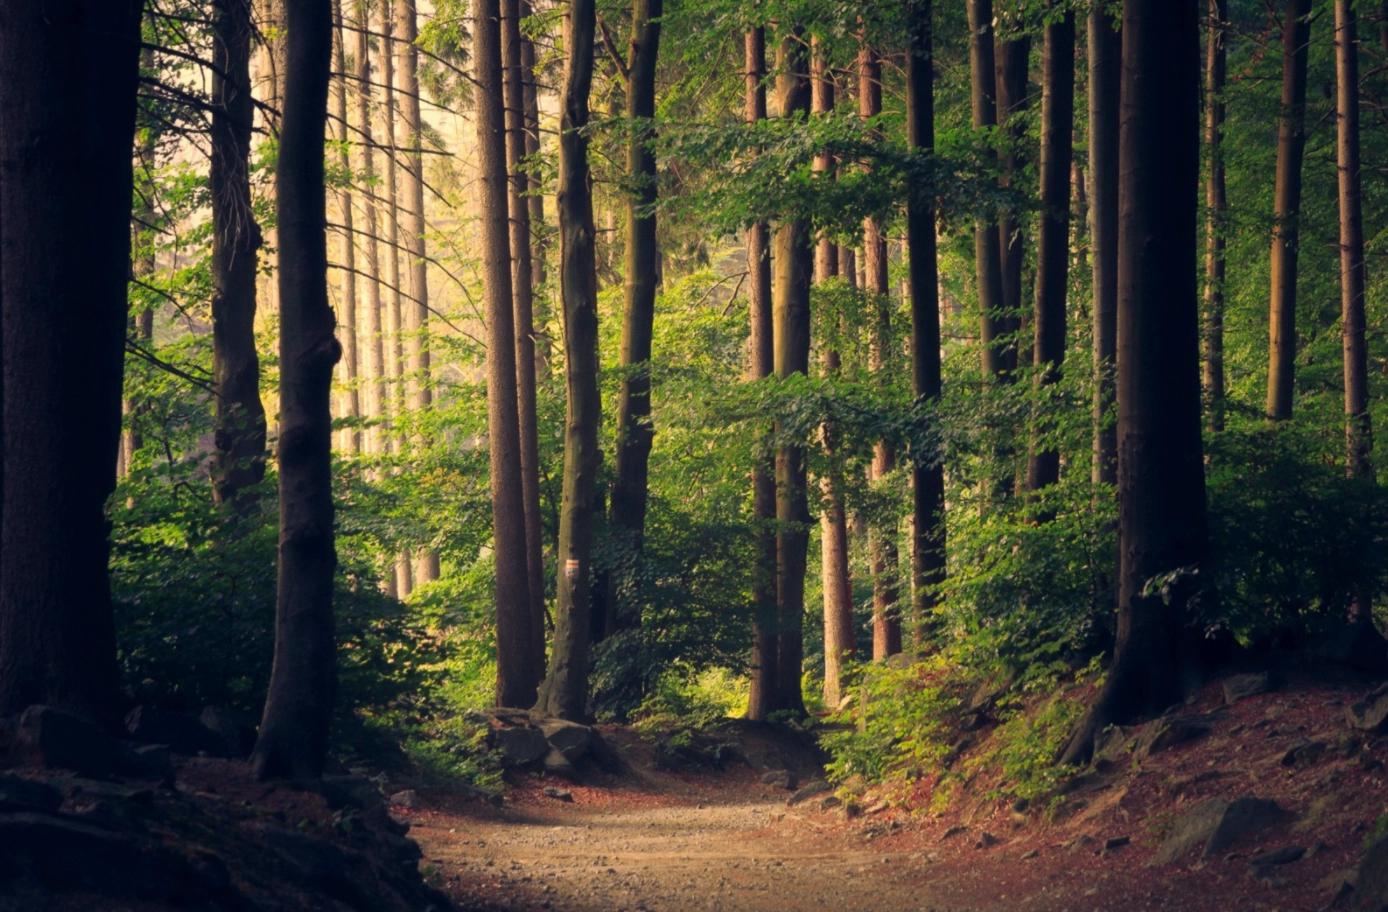 7 Scientific Reasons Your Mind and Body Want to Walk in Nature (Green Space Counts)